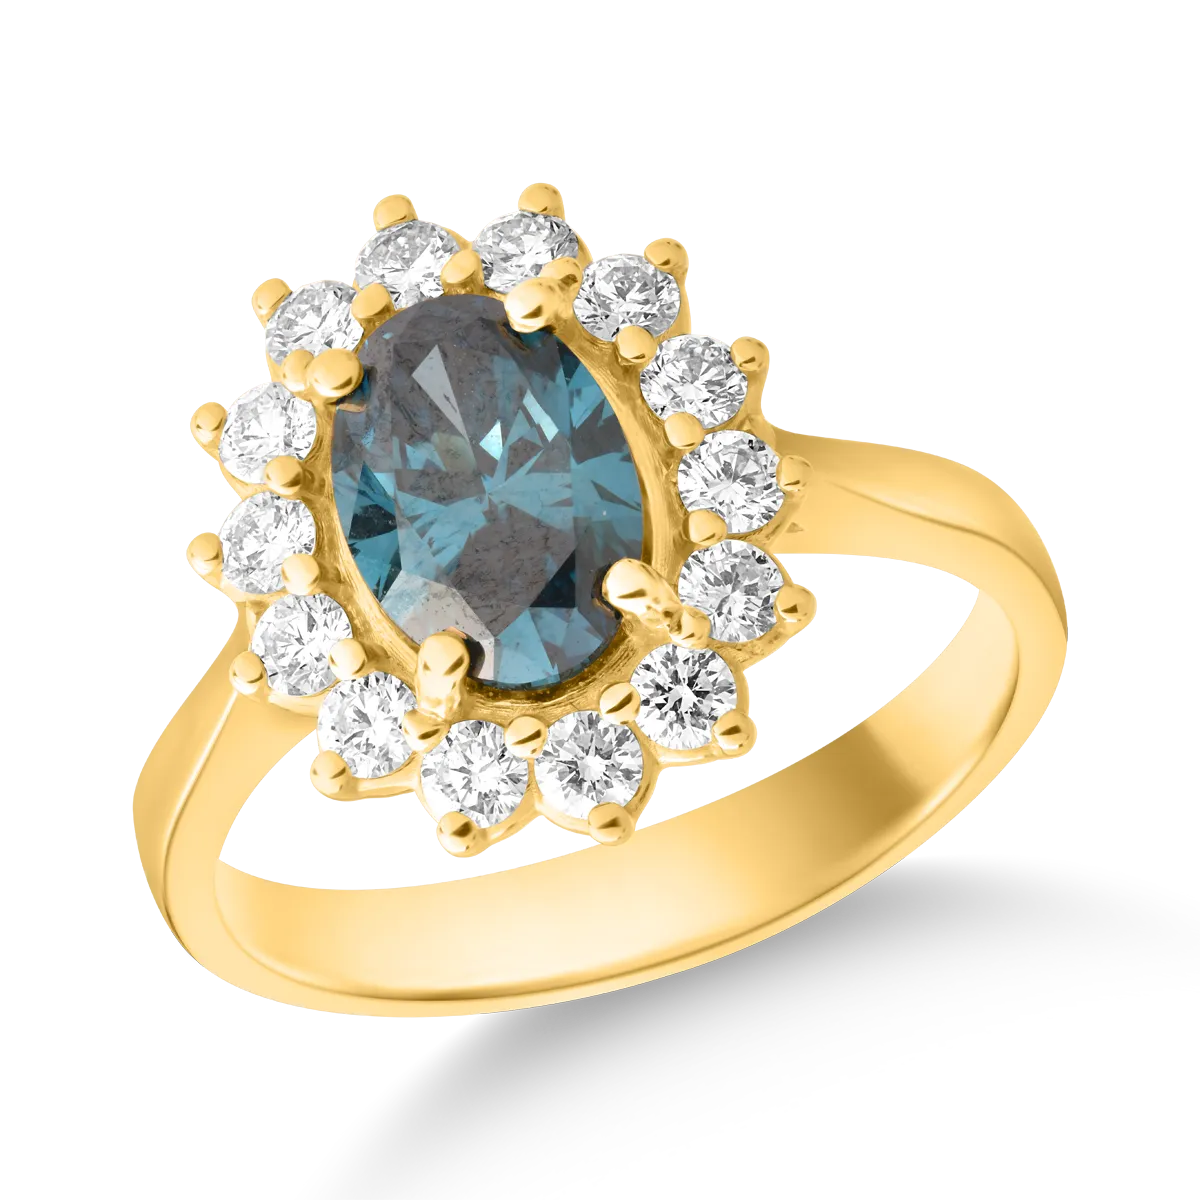 18K yellow gold ring with 1.01ct blue diamond and 0.4ct diamonds